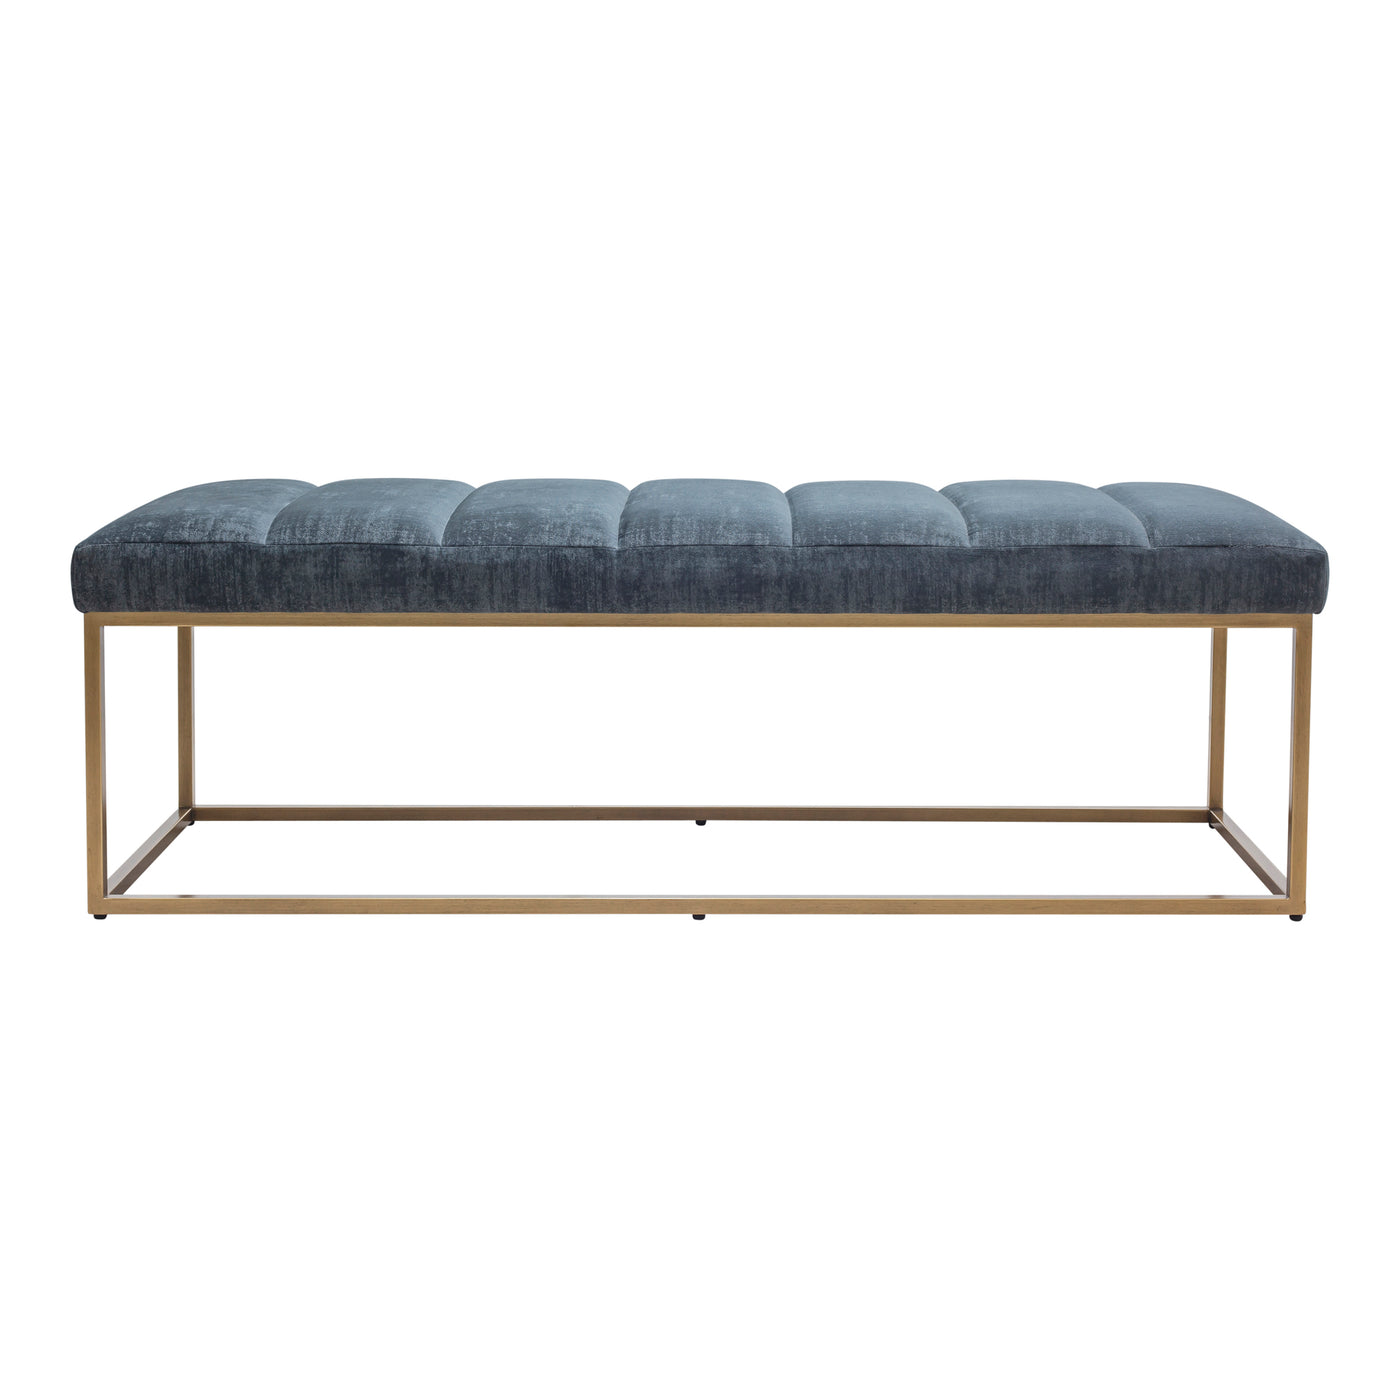 Sit down and relax on this modern classic. With plenty of seating room, the Katie bench offers foam padding, soft upholste...